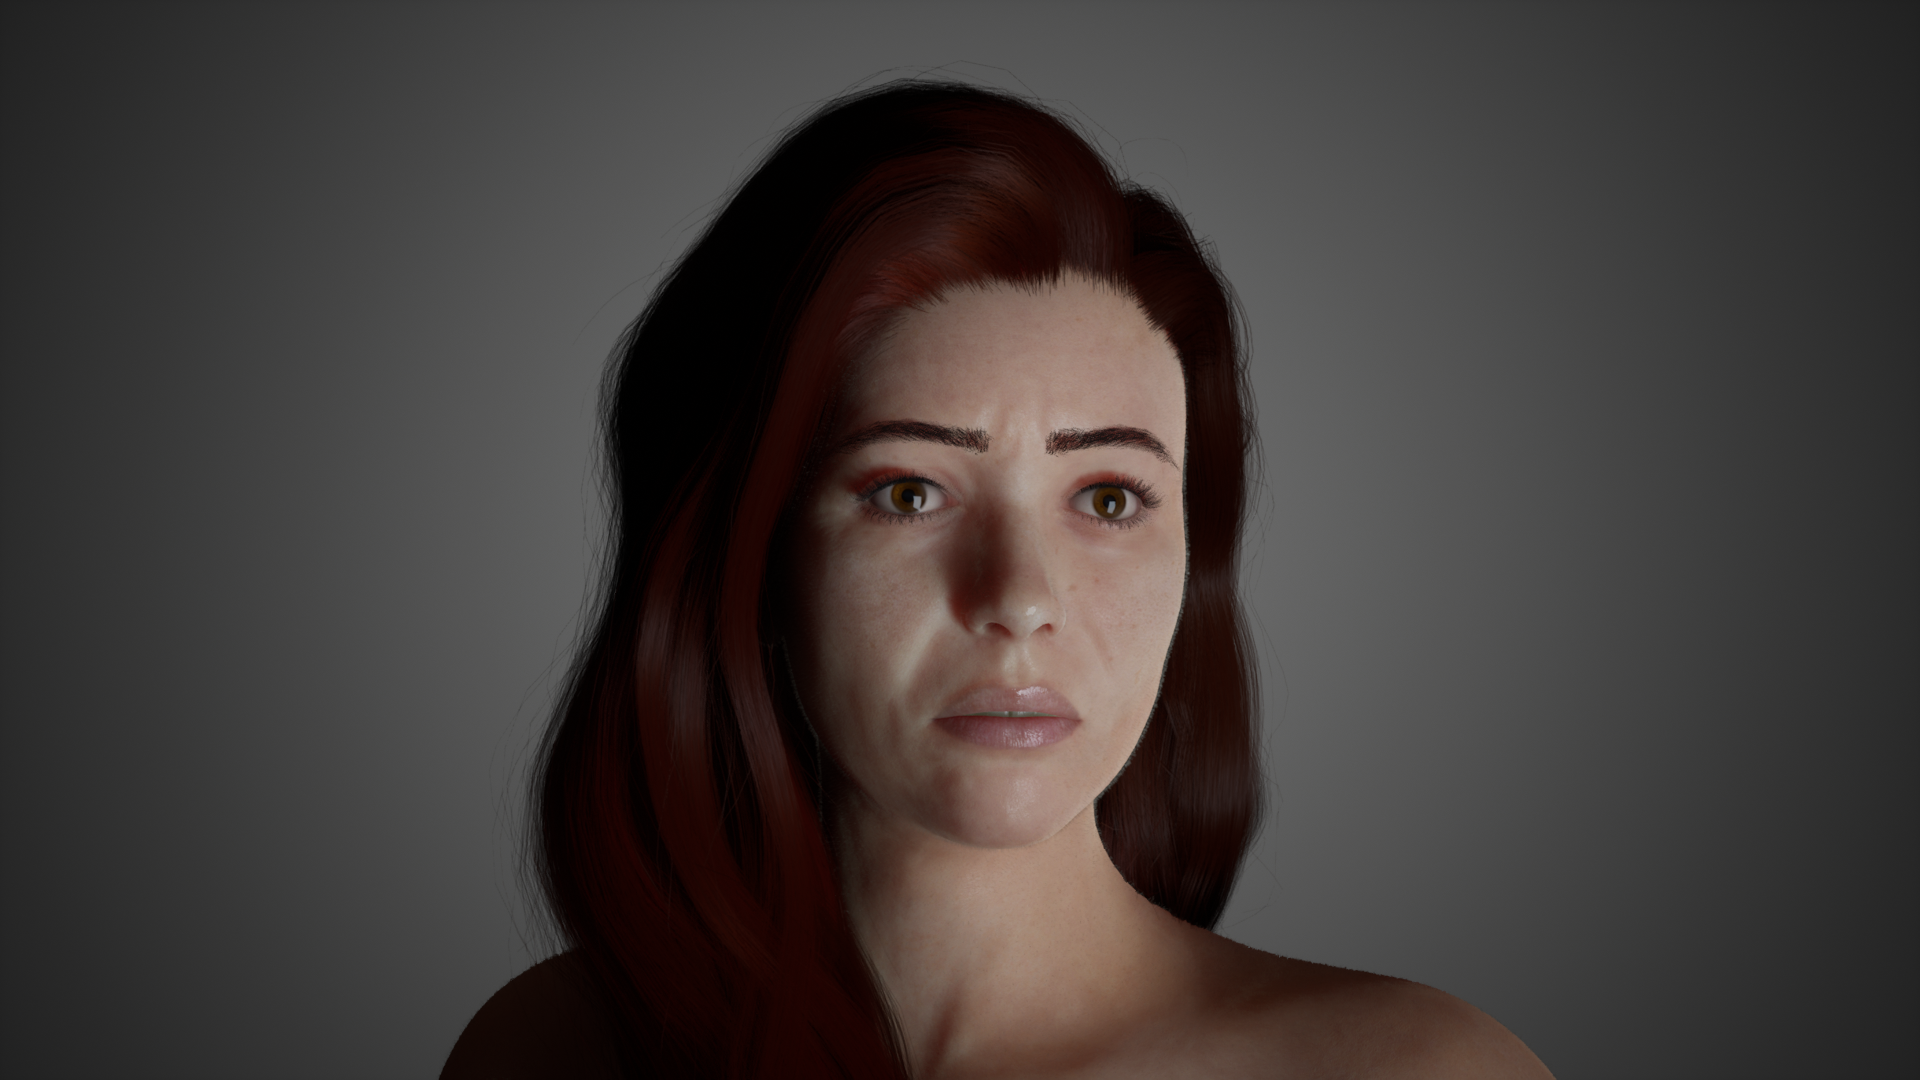 In-game footage of a female character showing facial expressions created inside our character creation tool.